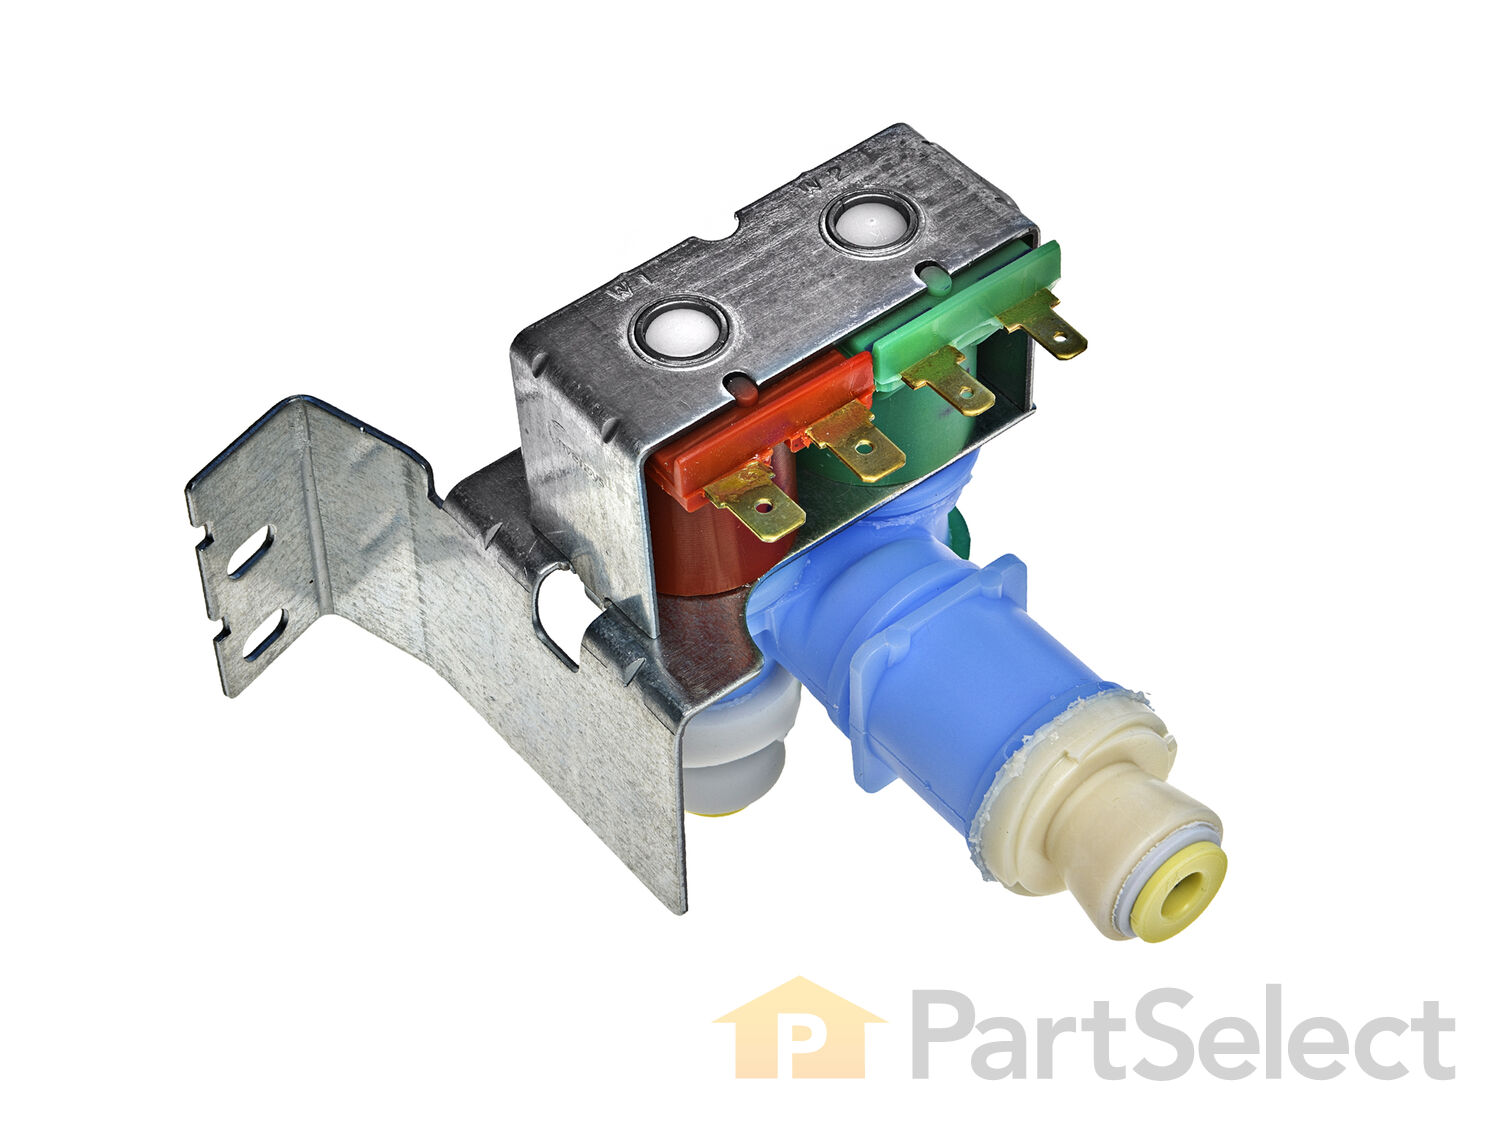 PRIORITY $5.95-Whirlpool Valve W10408179 fits PS3497634 